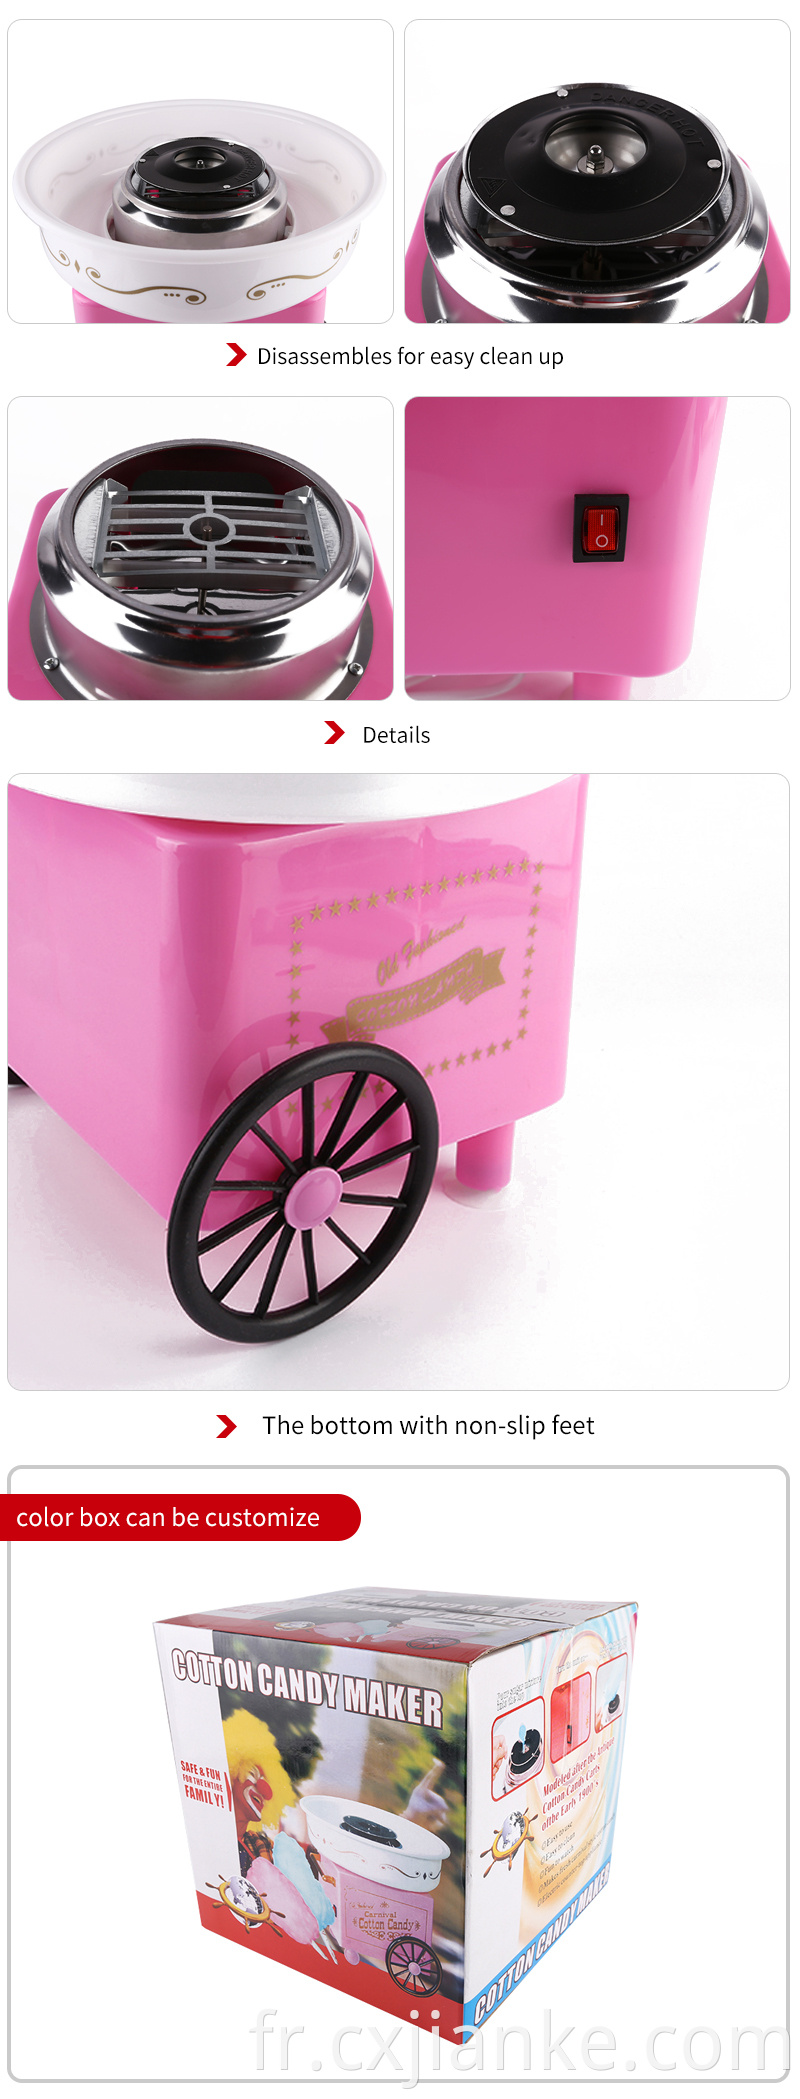 China Factory Home Electric Cotton Machine et Candy Maker électrique et Cotton Candy Maker